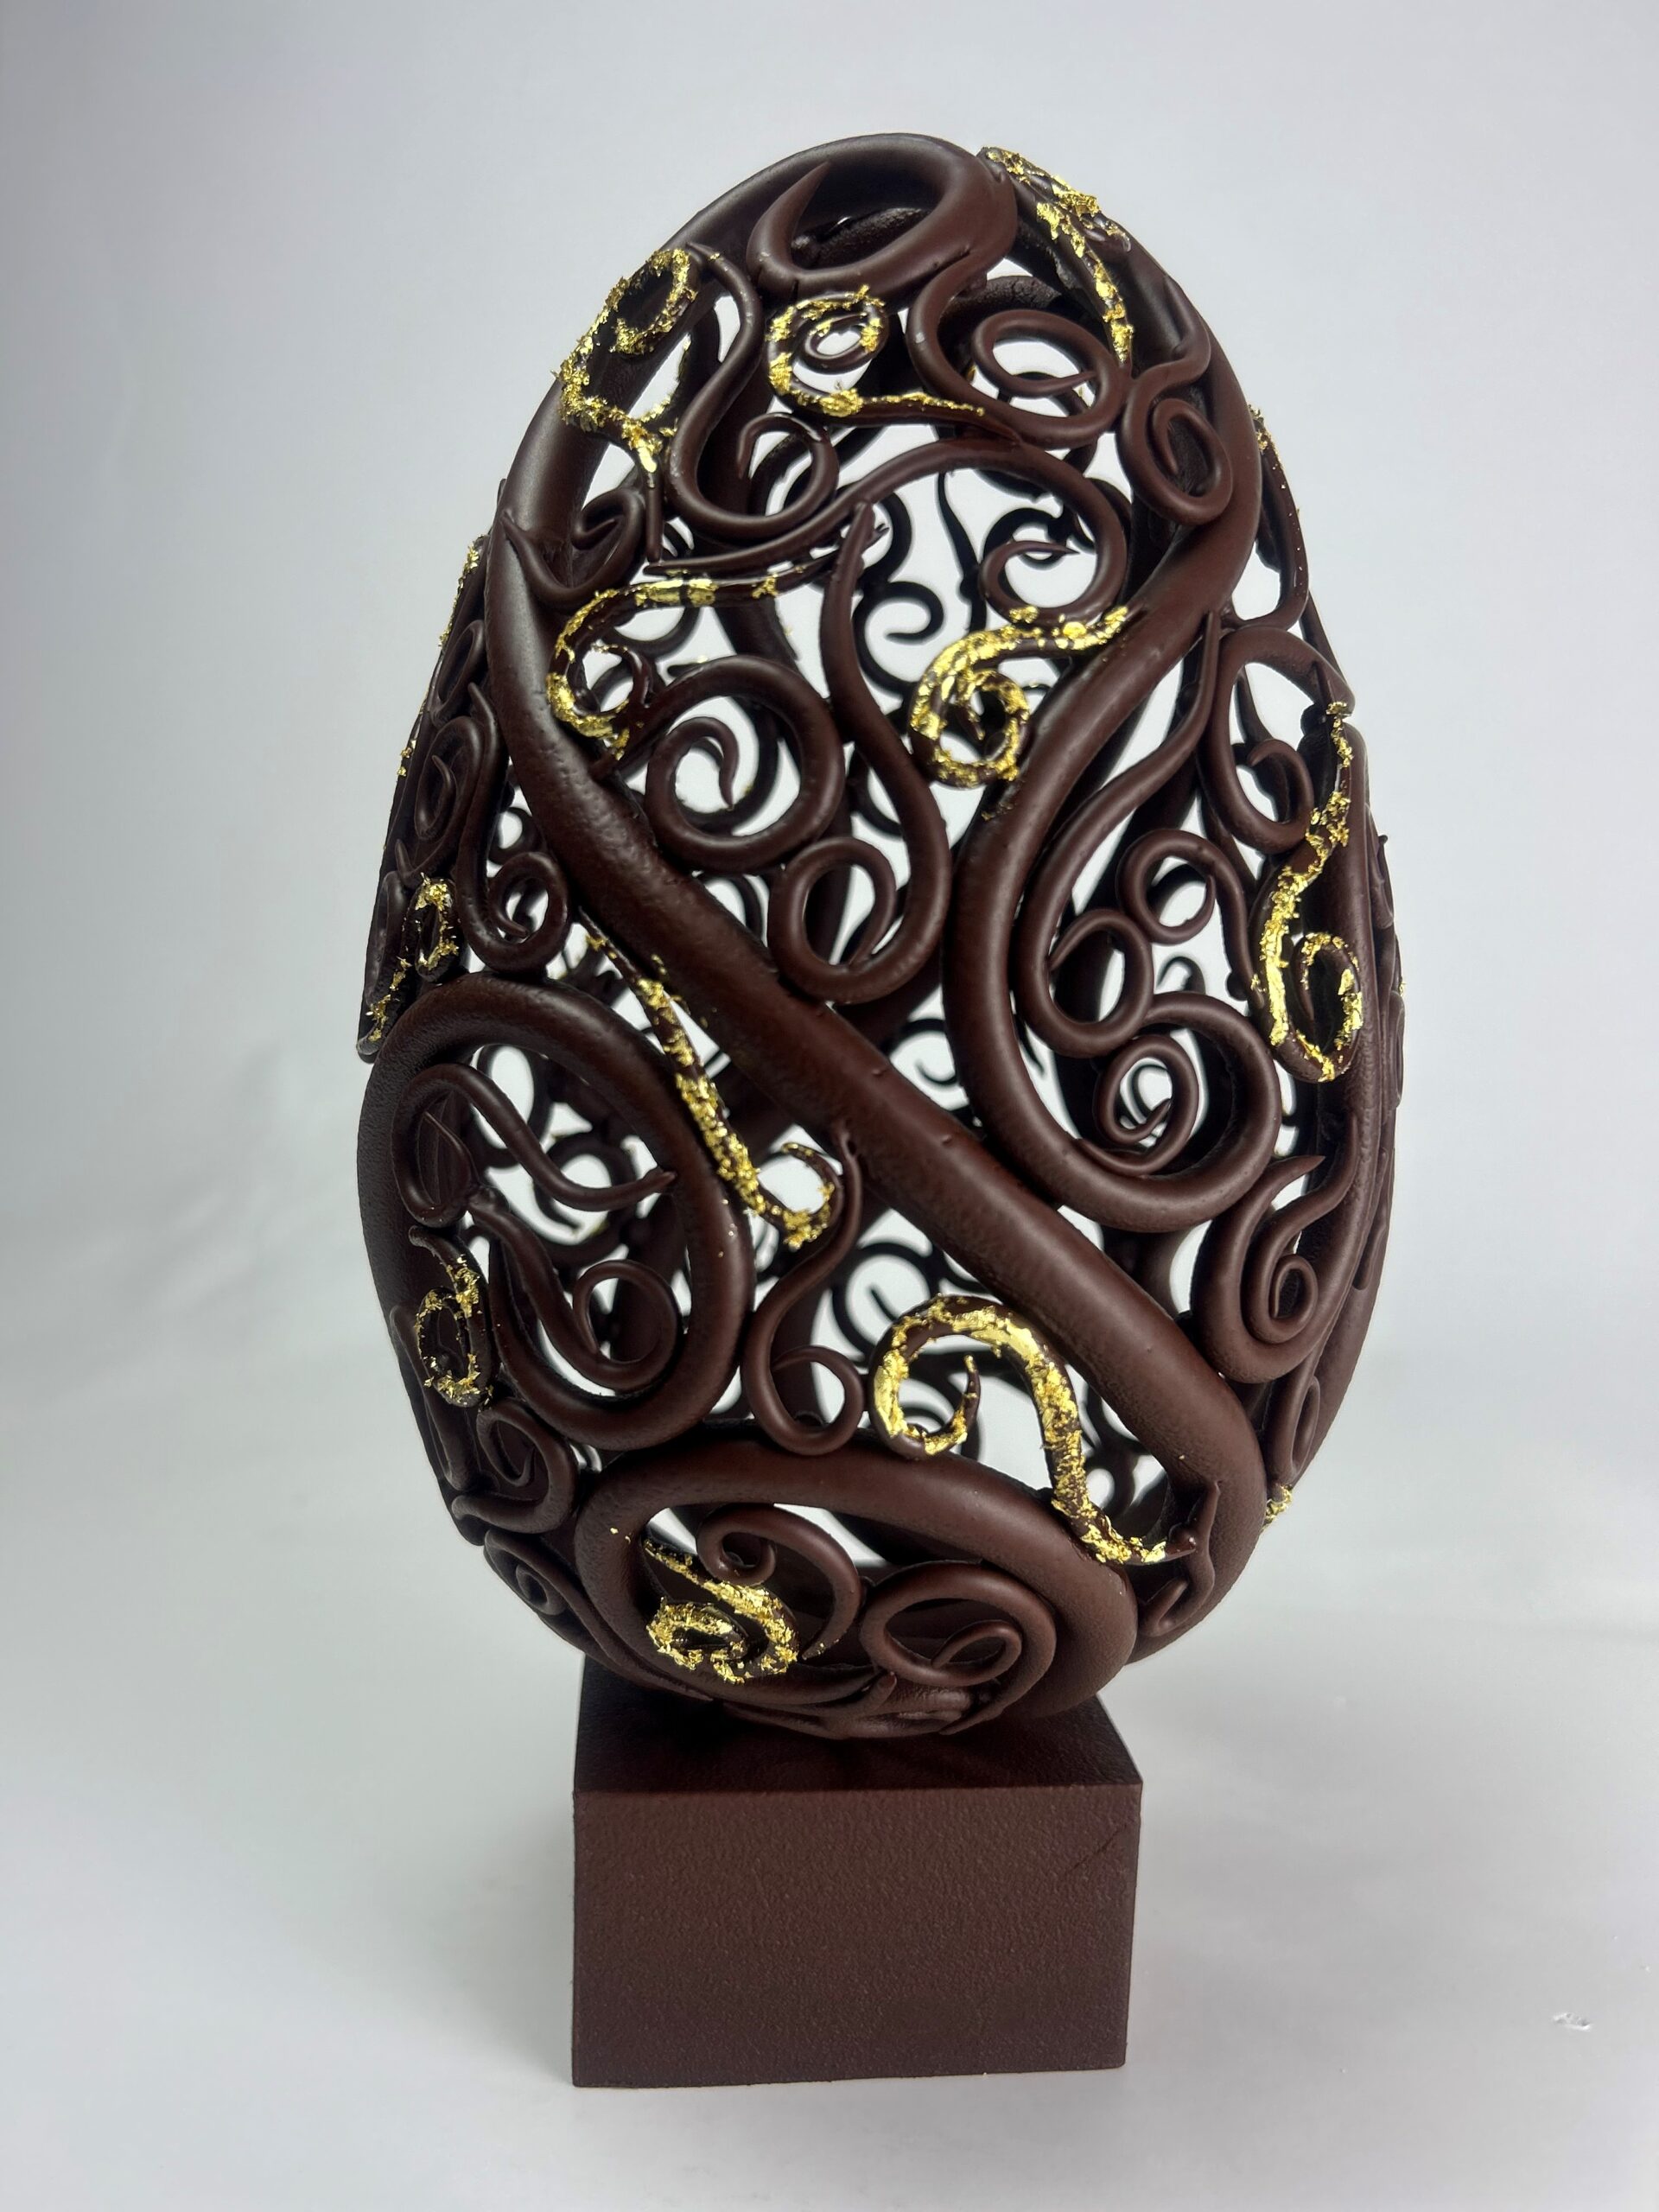 A fusion of “tradition and innovation”: Easter egg creation at École Supérieure de Pâtisserie